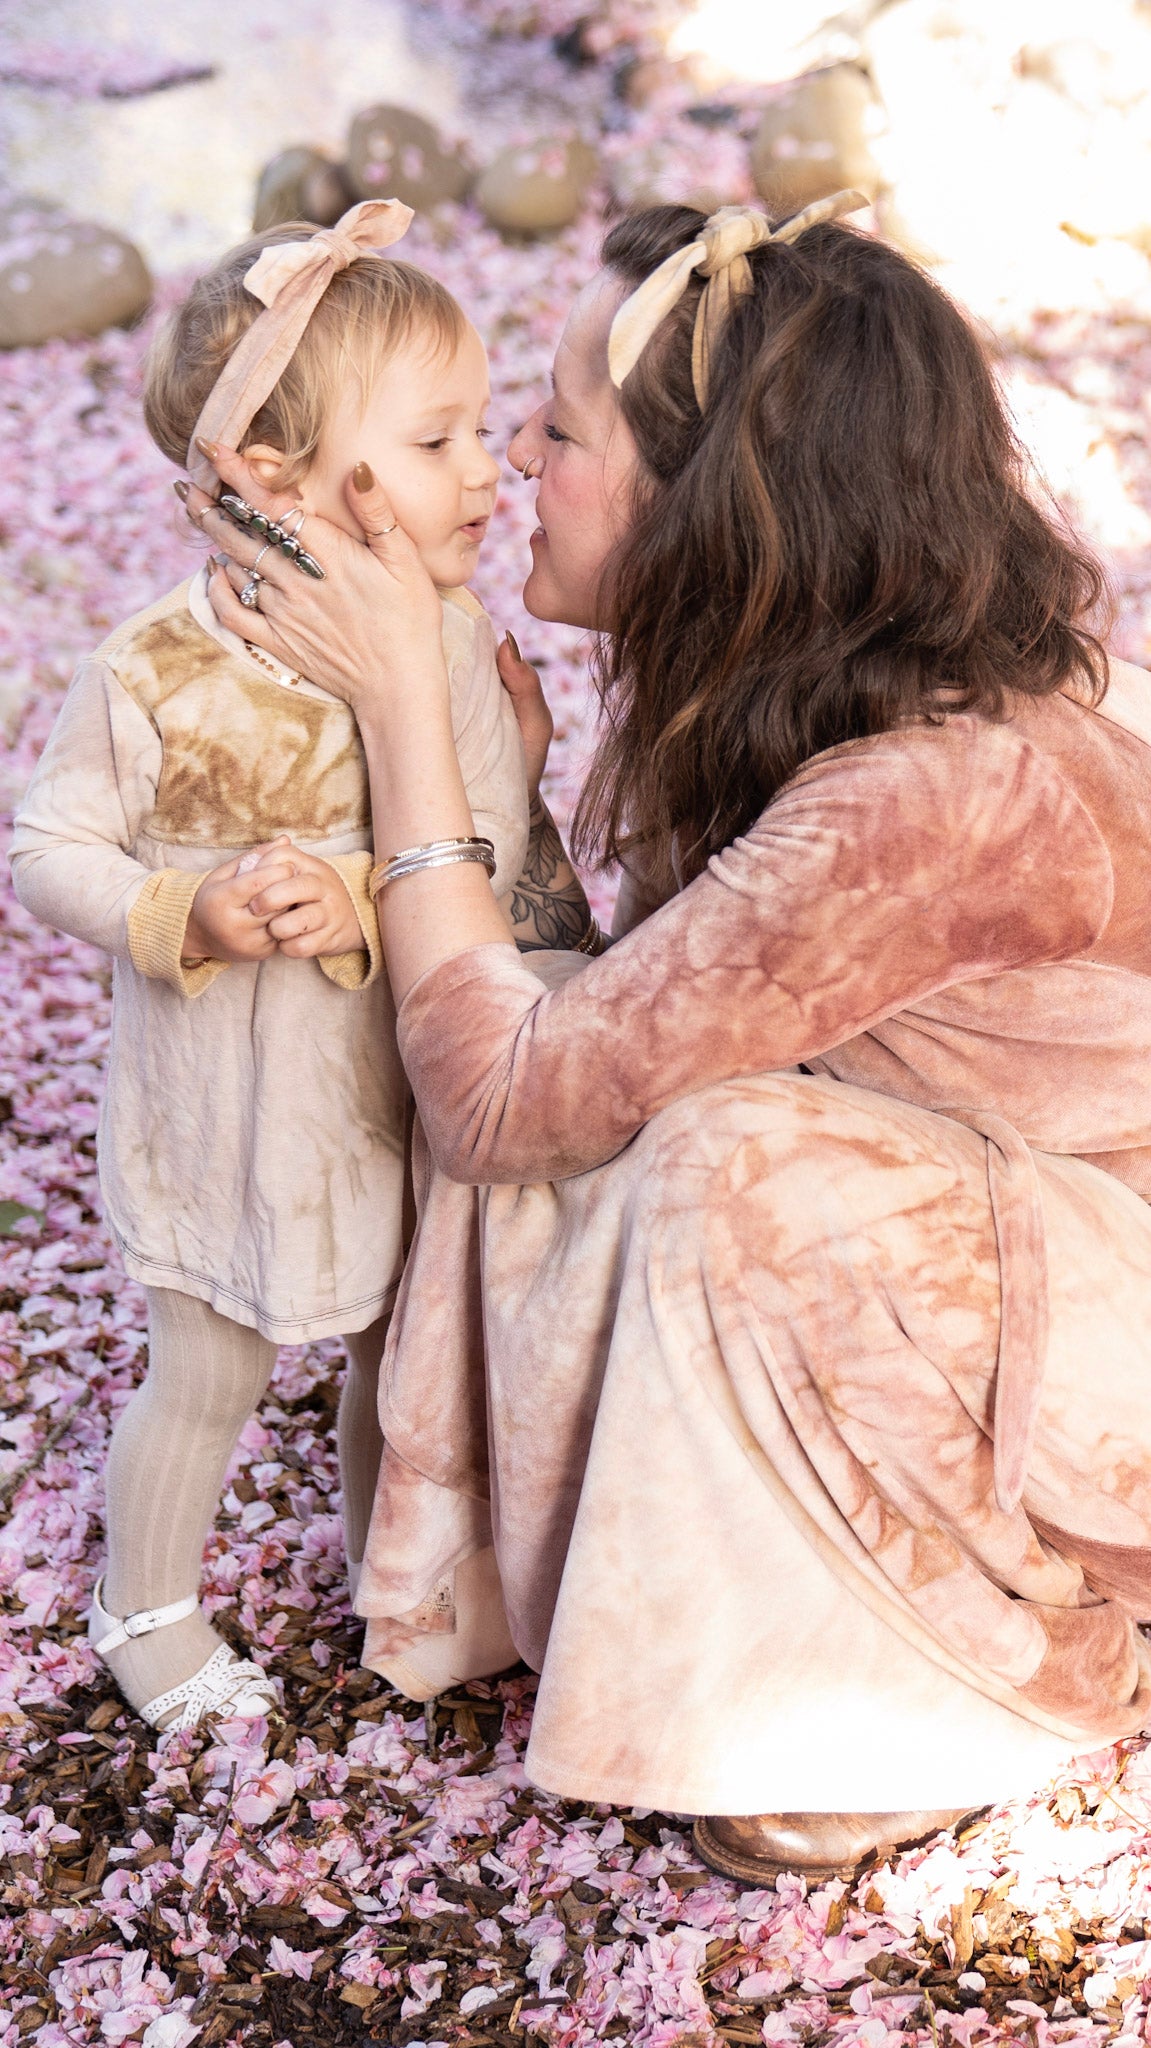 A woman crouched down in a pink velour dress with hands on her daughter's cheeks